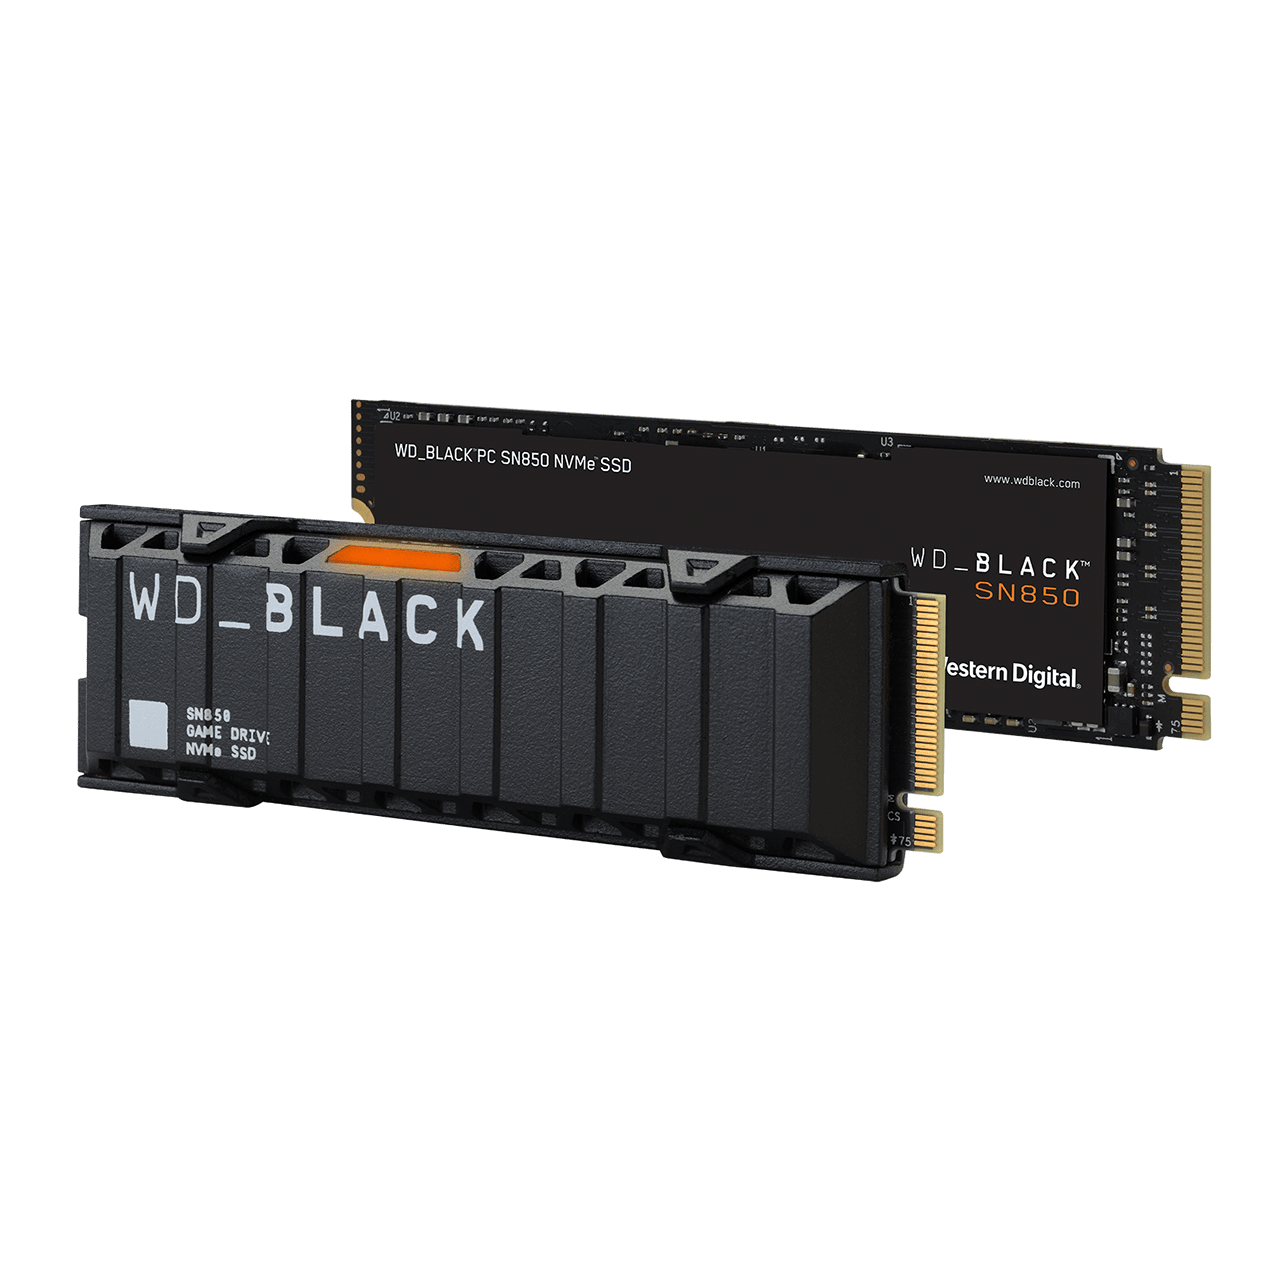 wd-black-sn850-nvme-ssd-family.png.thumb.1280.1280.png